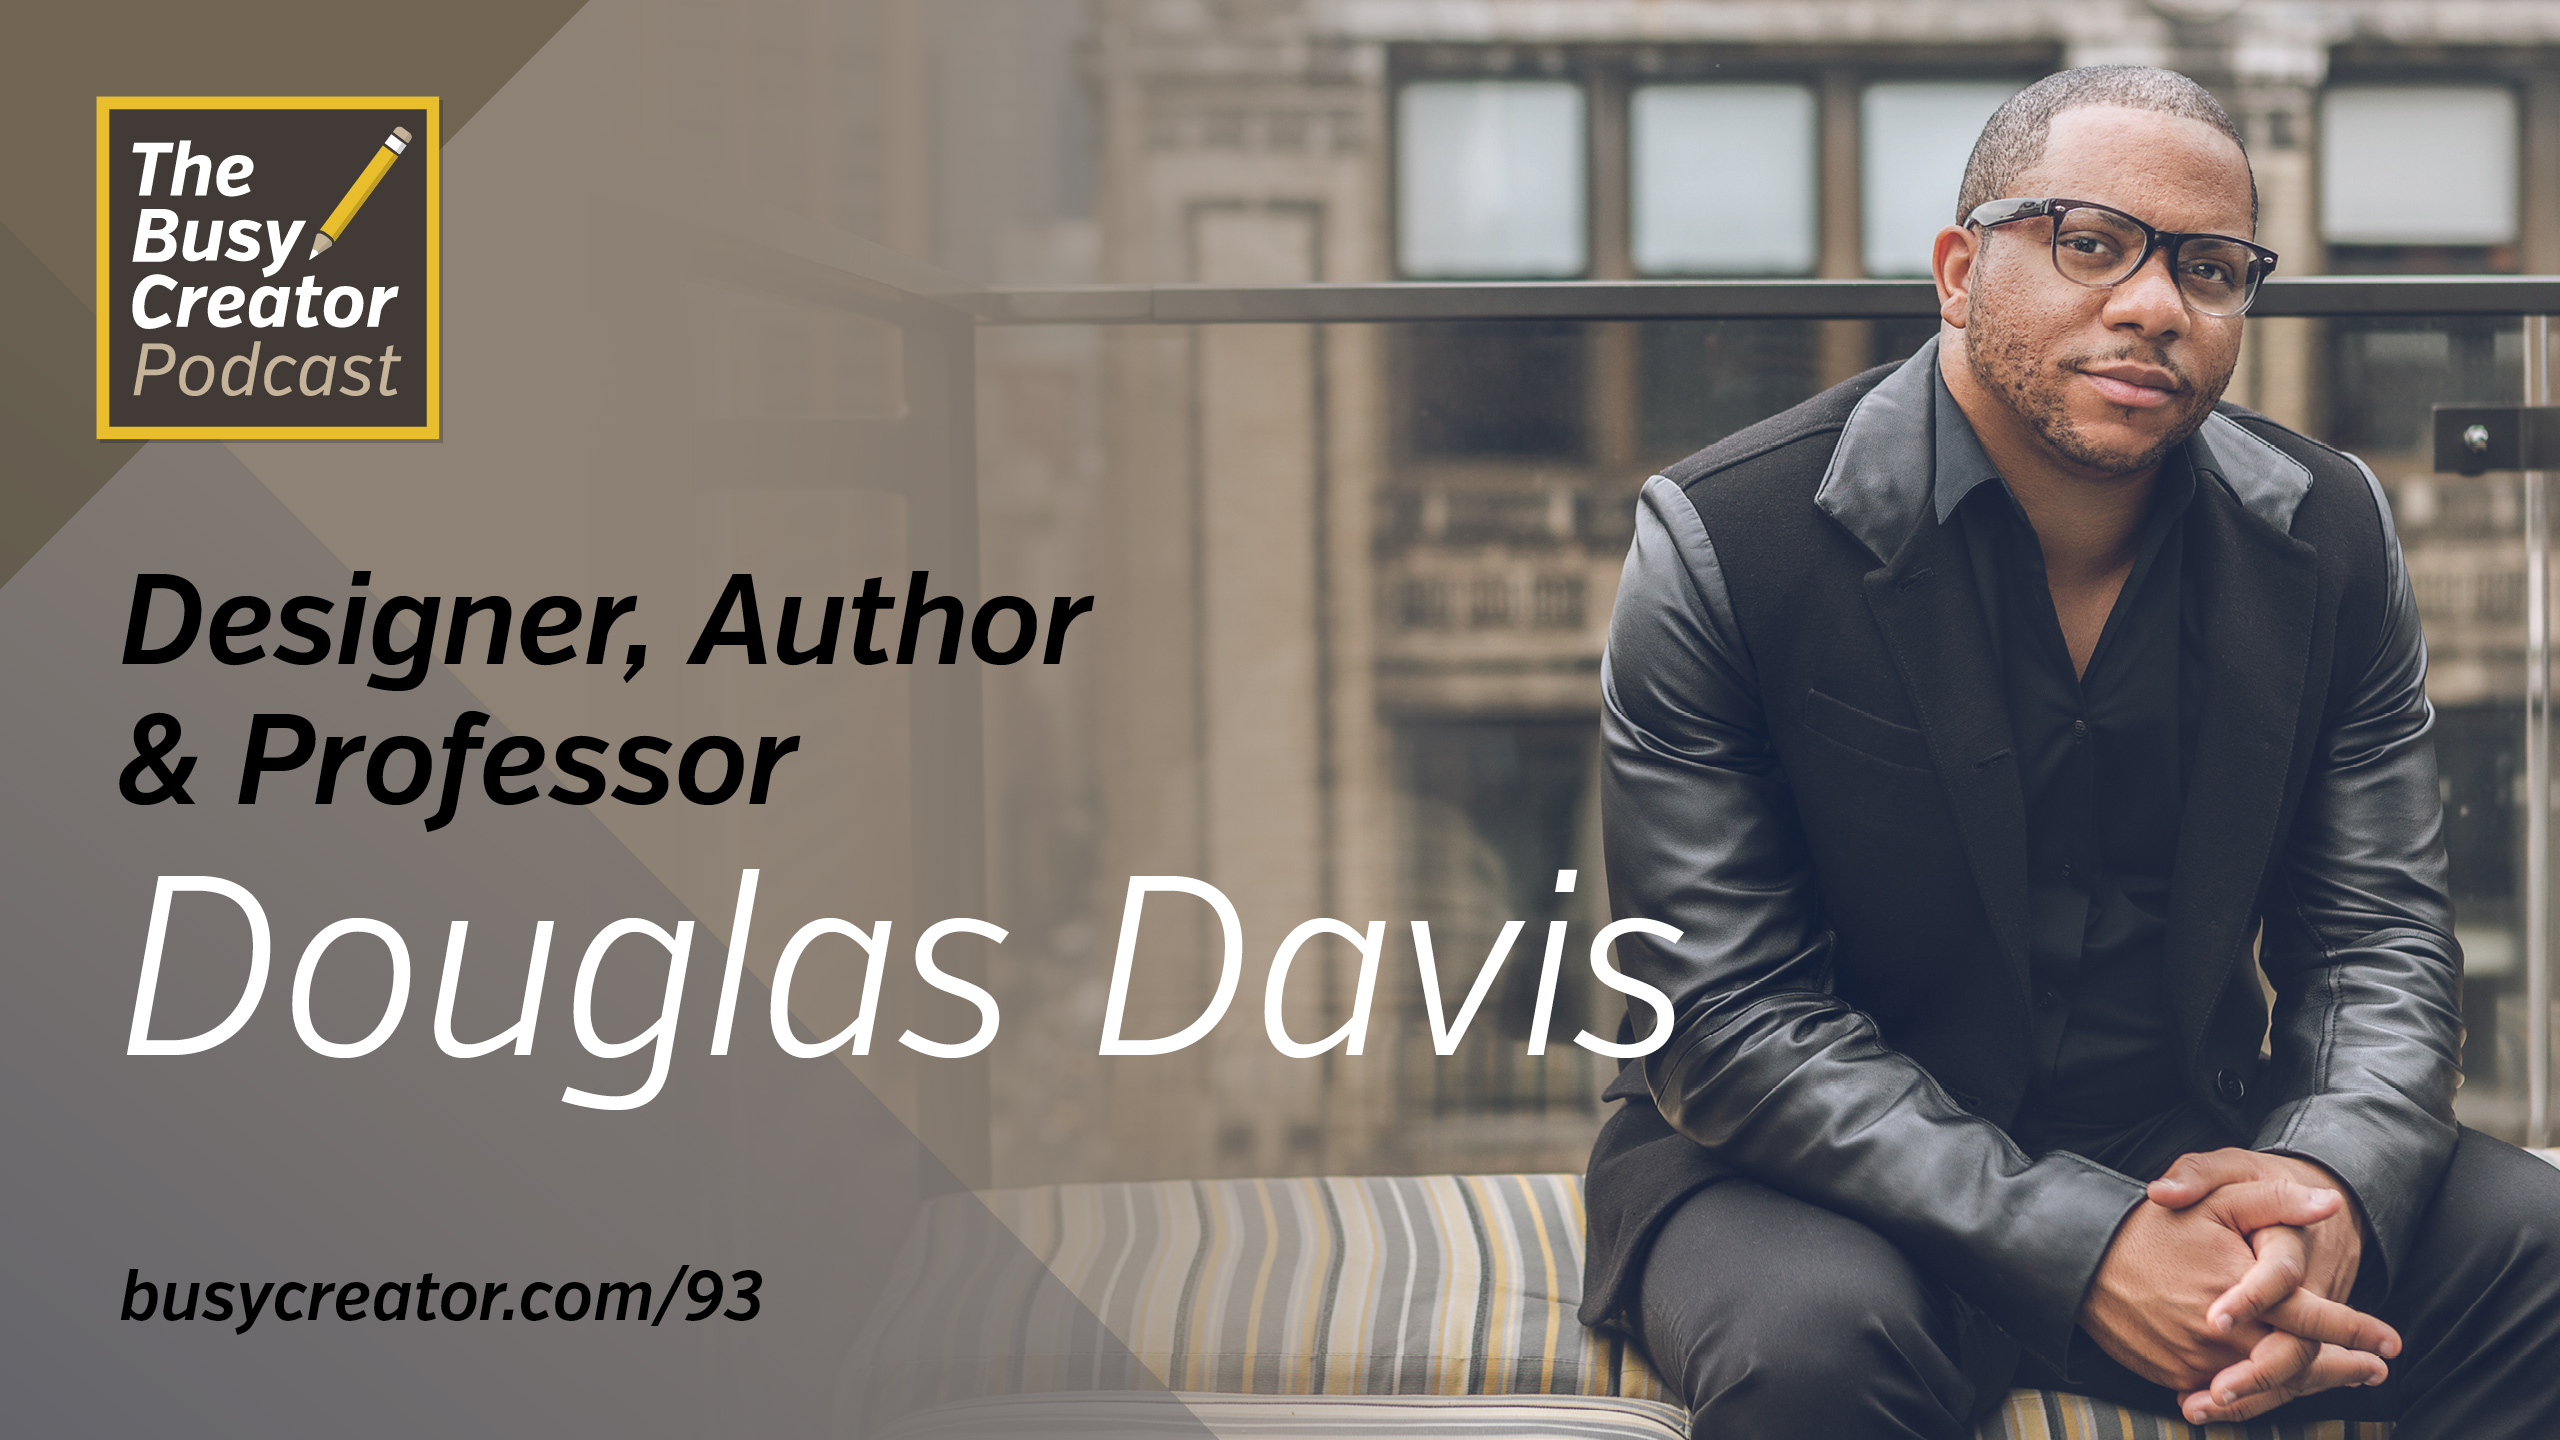 Exploring Business Issues Faced by Creative Pros with Author & Professor Douglas Davis